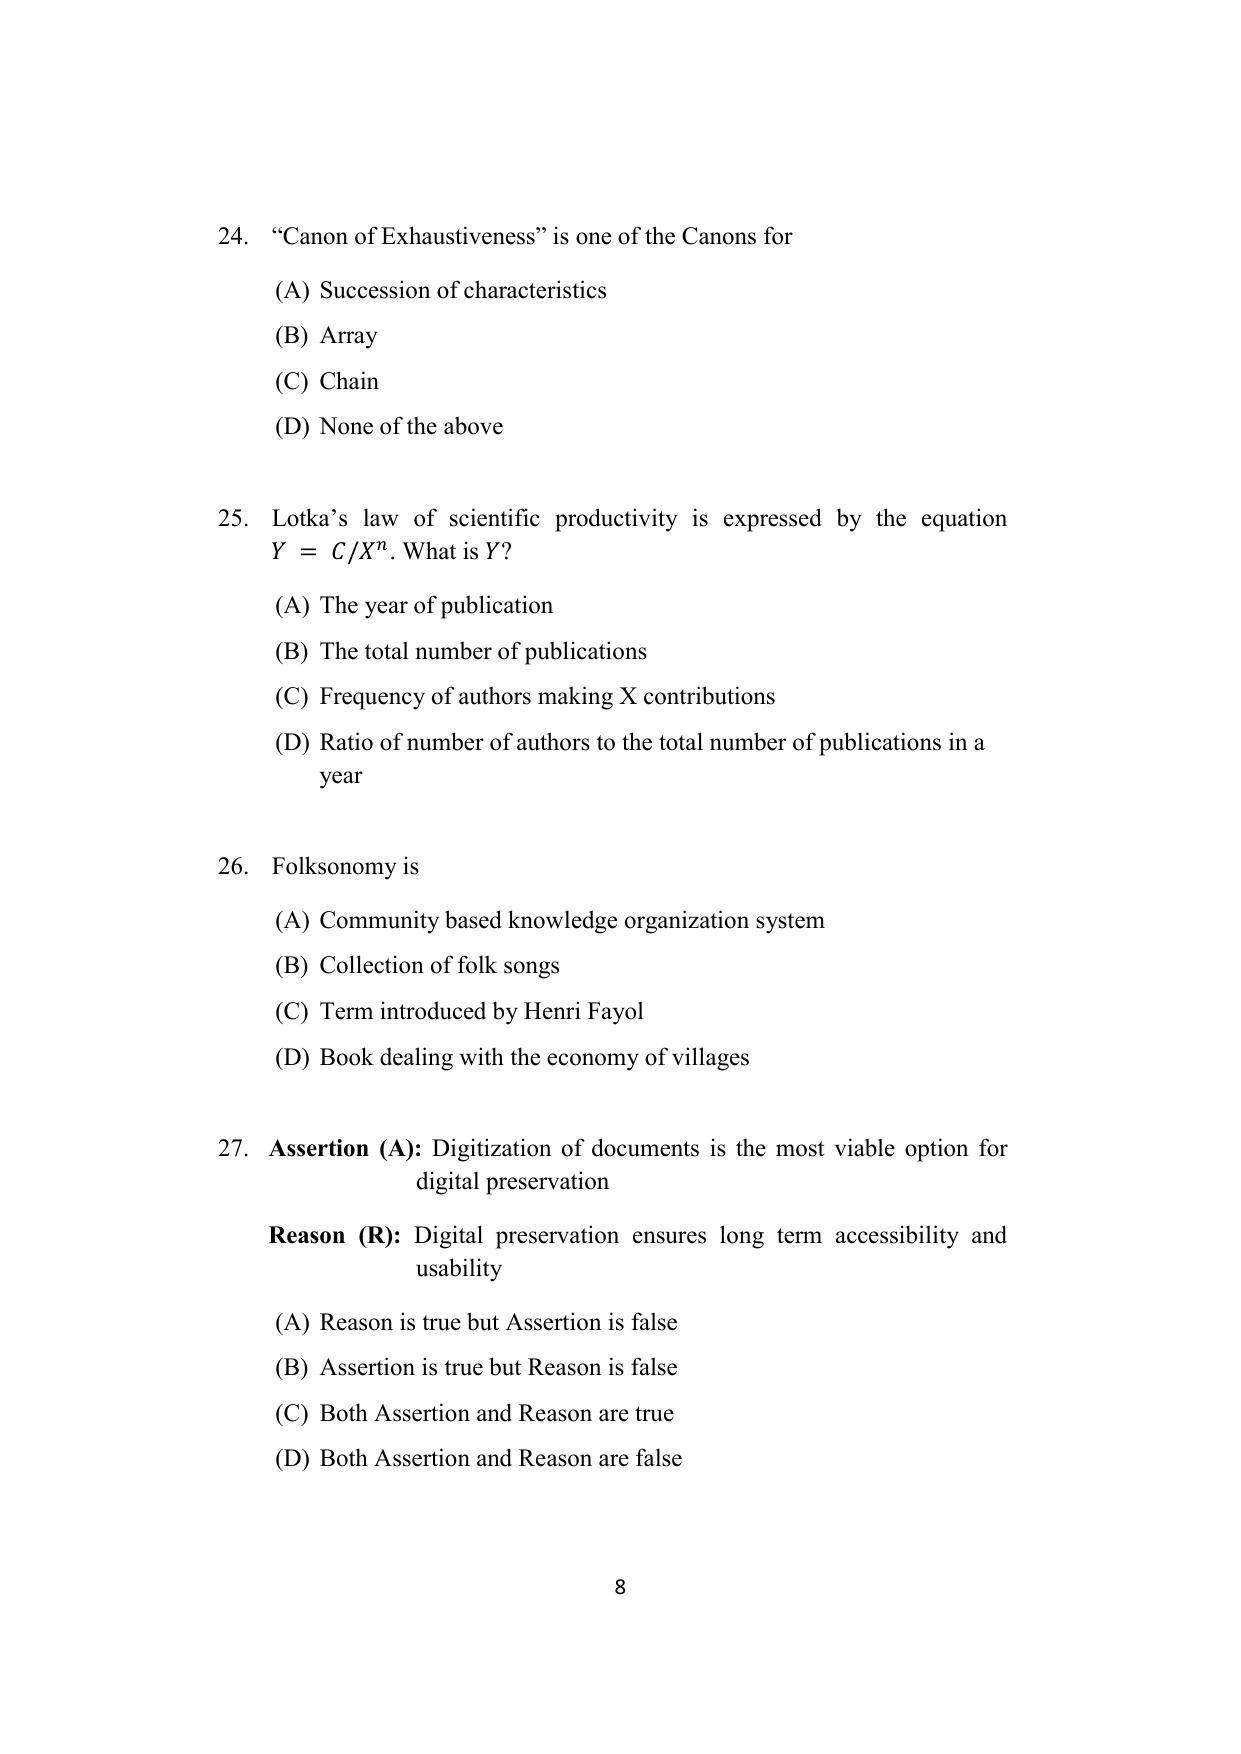 ISI Admission Test JRF in Library and Information Science LIA 2021 Sample Paper - Page 8